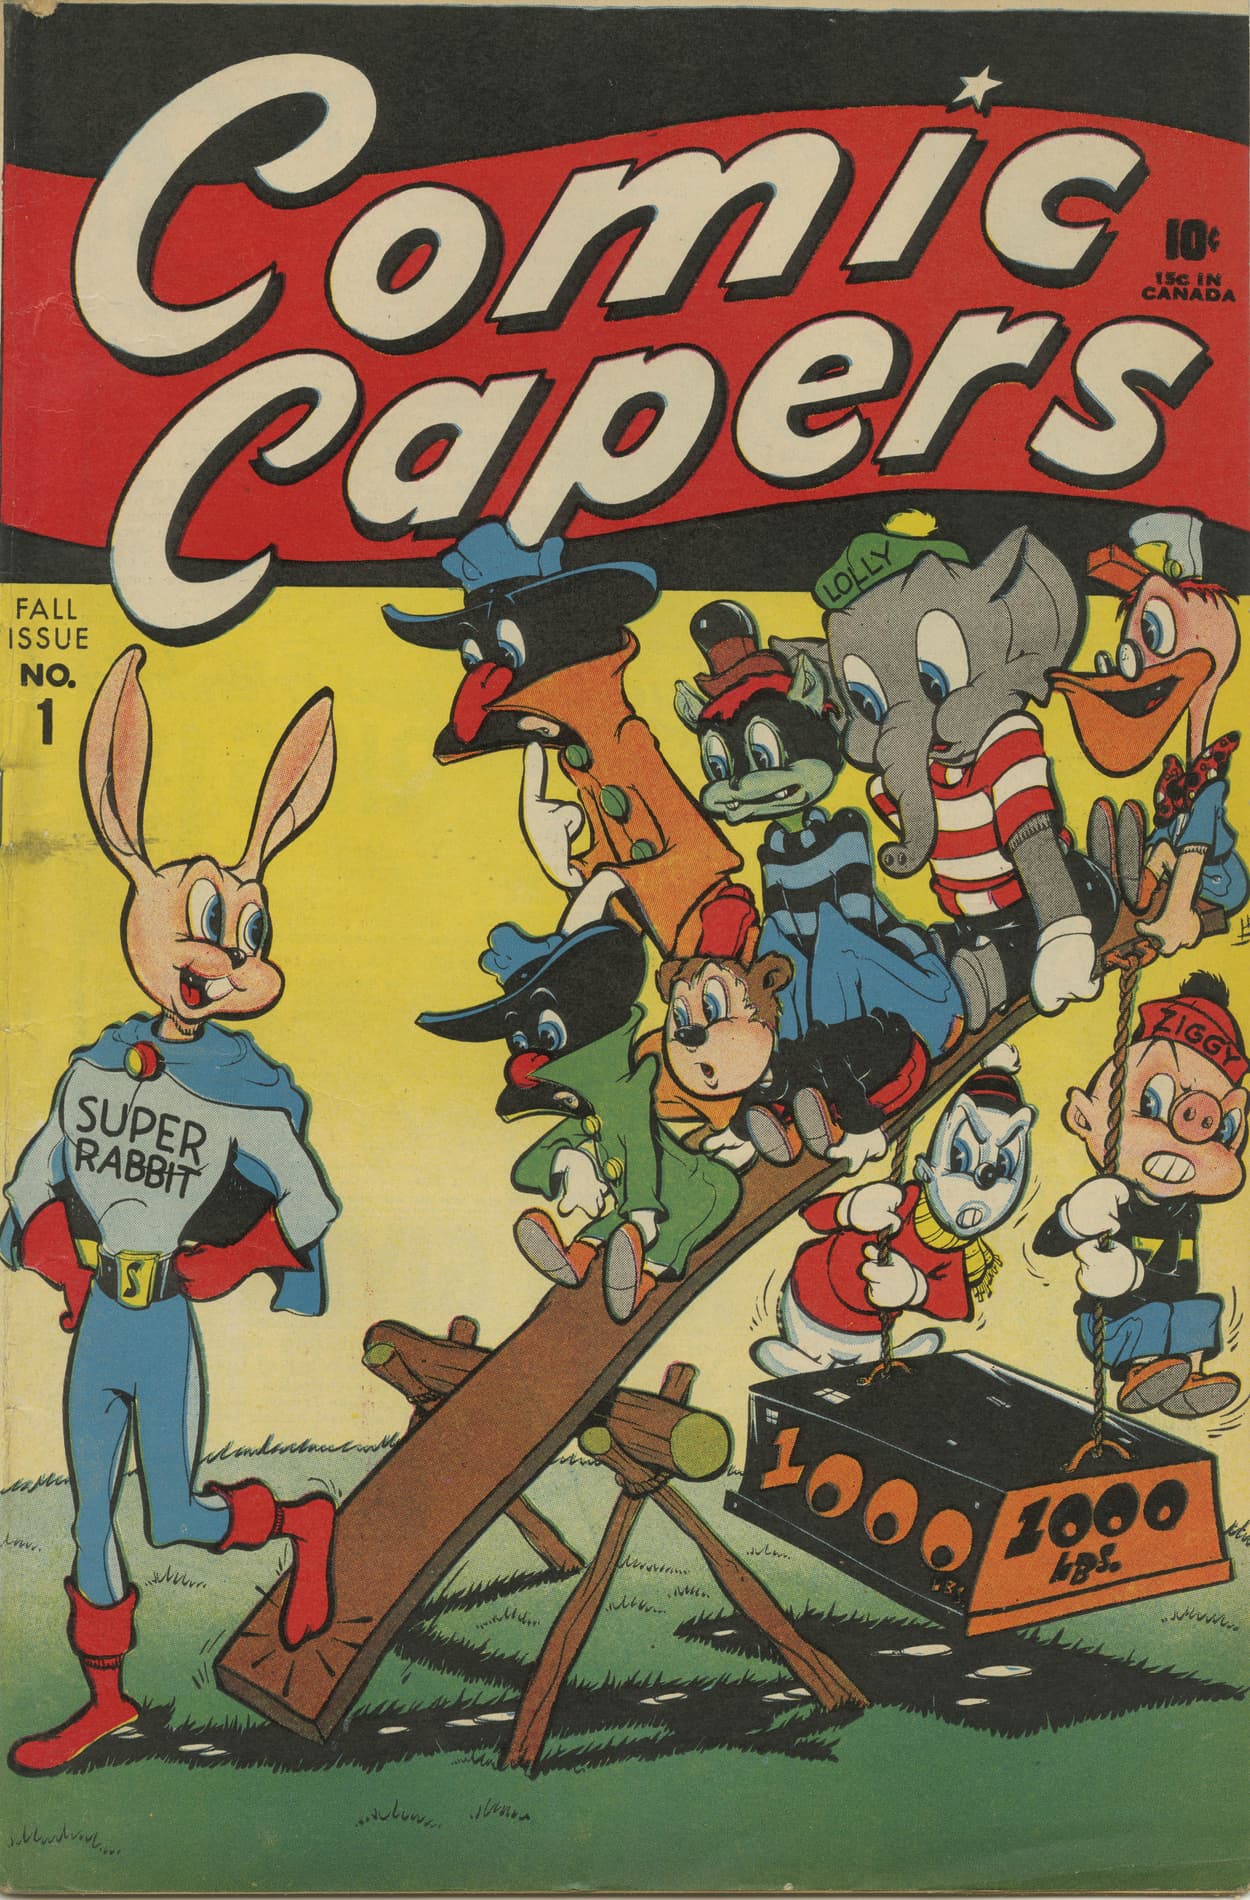 Cover of Comic Capers